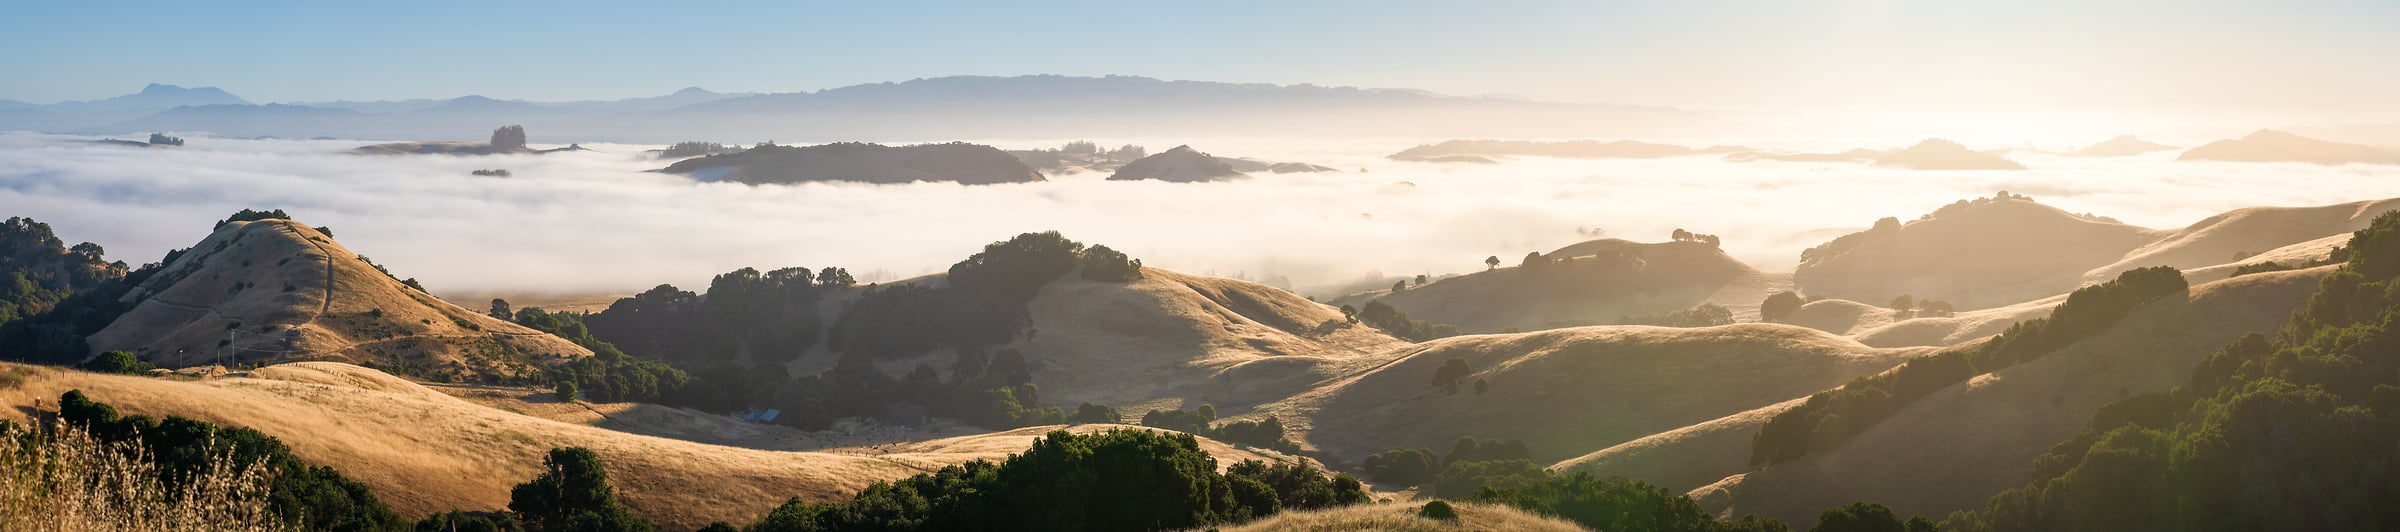 291 megapixels! A very high resolution, large-format VAST photo print of rolling hills at sunrise with fog; panorama photograph created by Jeff Lewis in Petaluma, California.